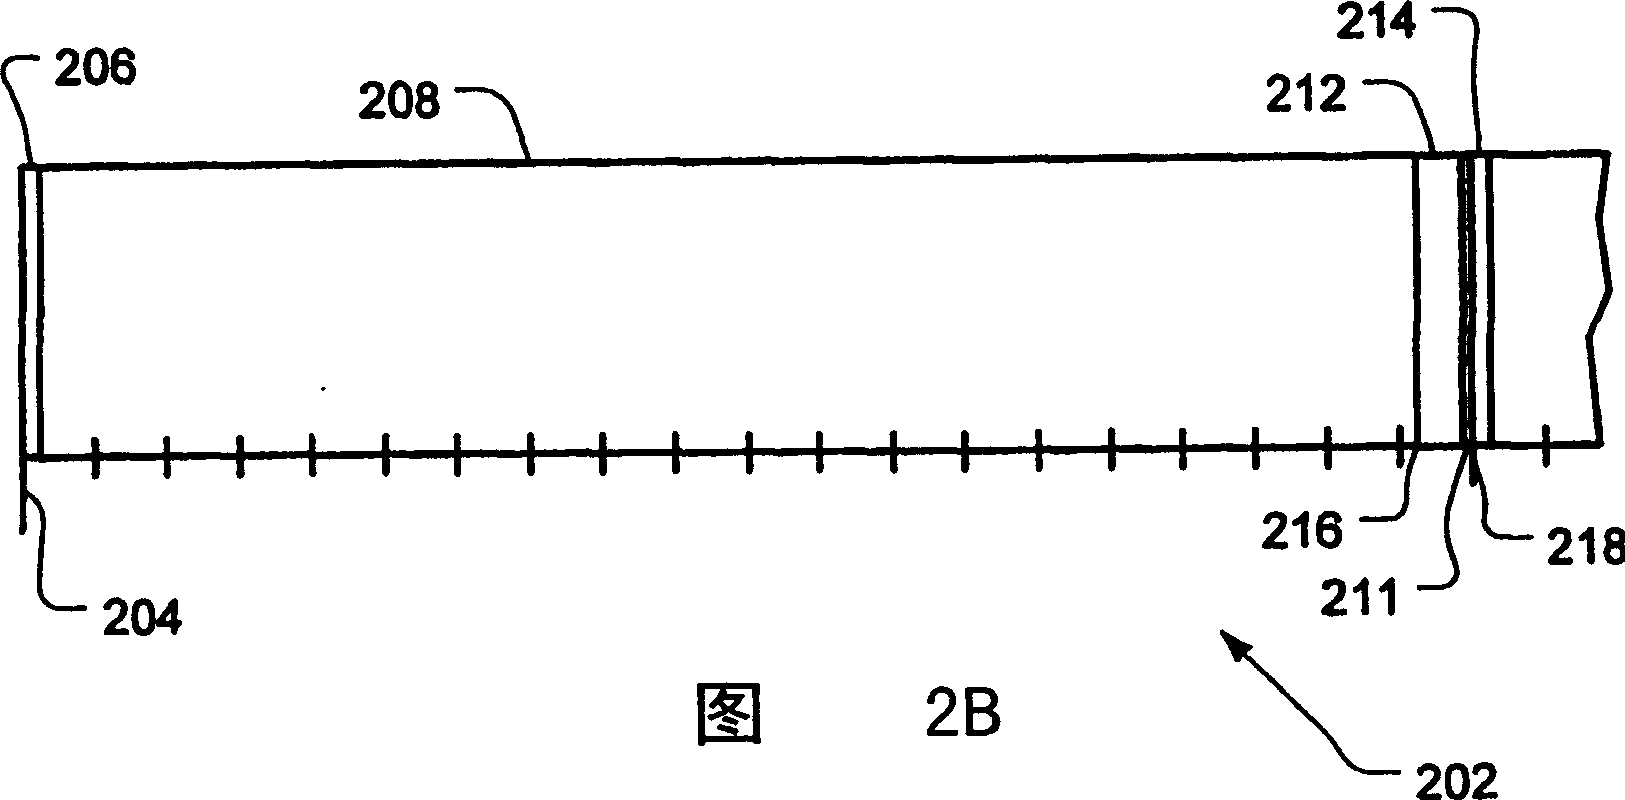 Efficient access to variable-length data on a sequential access storage medium